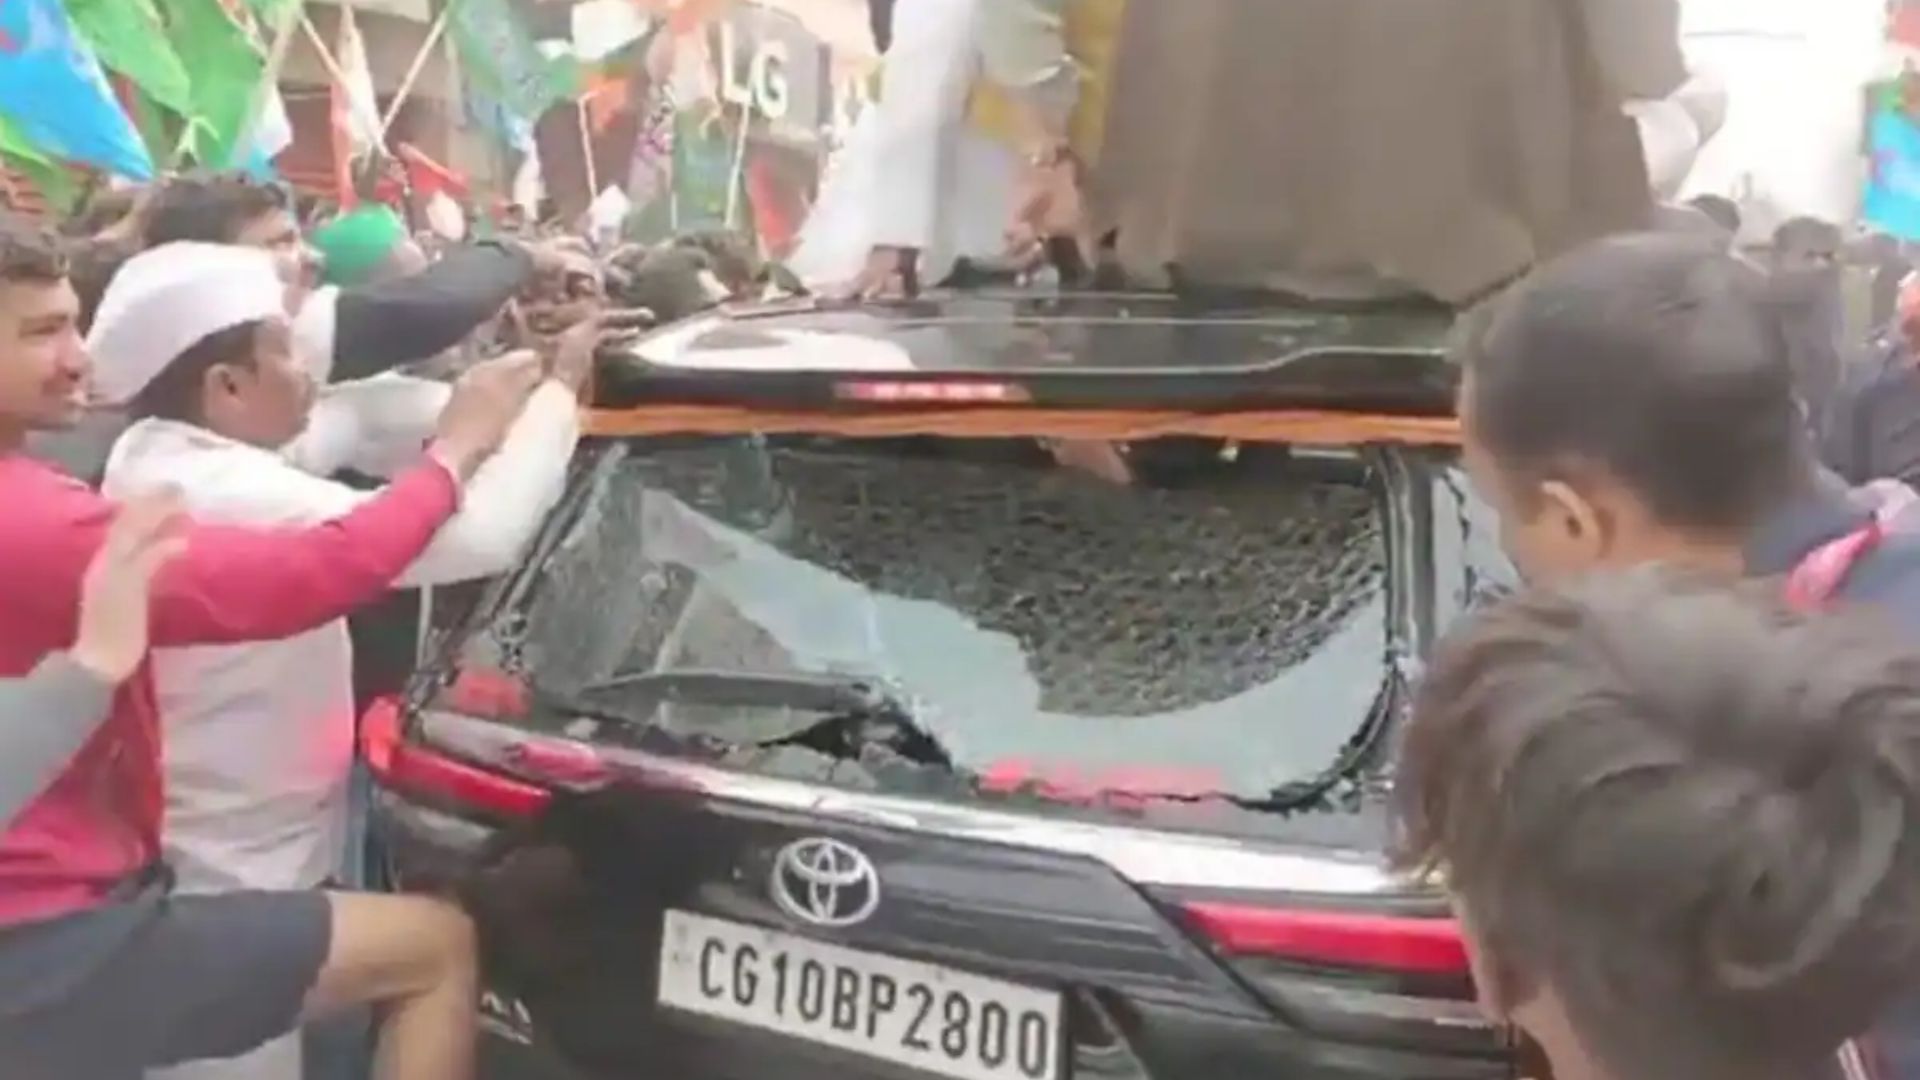 Rahul’s vehicle pelted with stones in Malda, alleges Congress leader Adhir